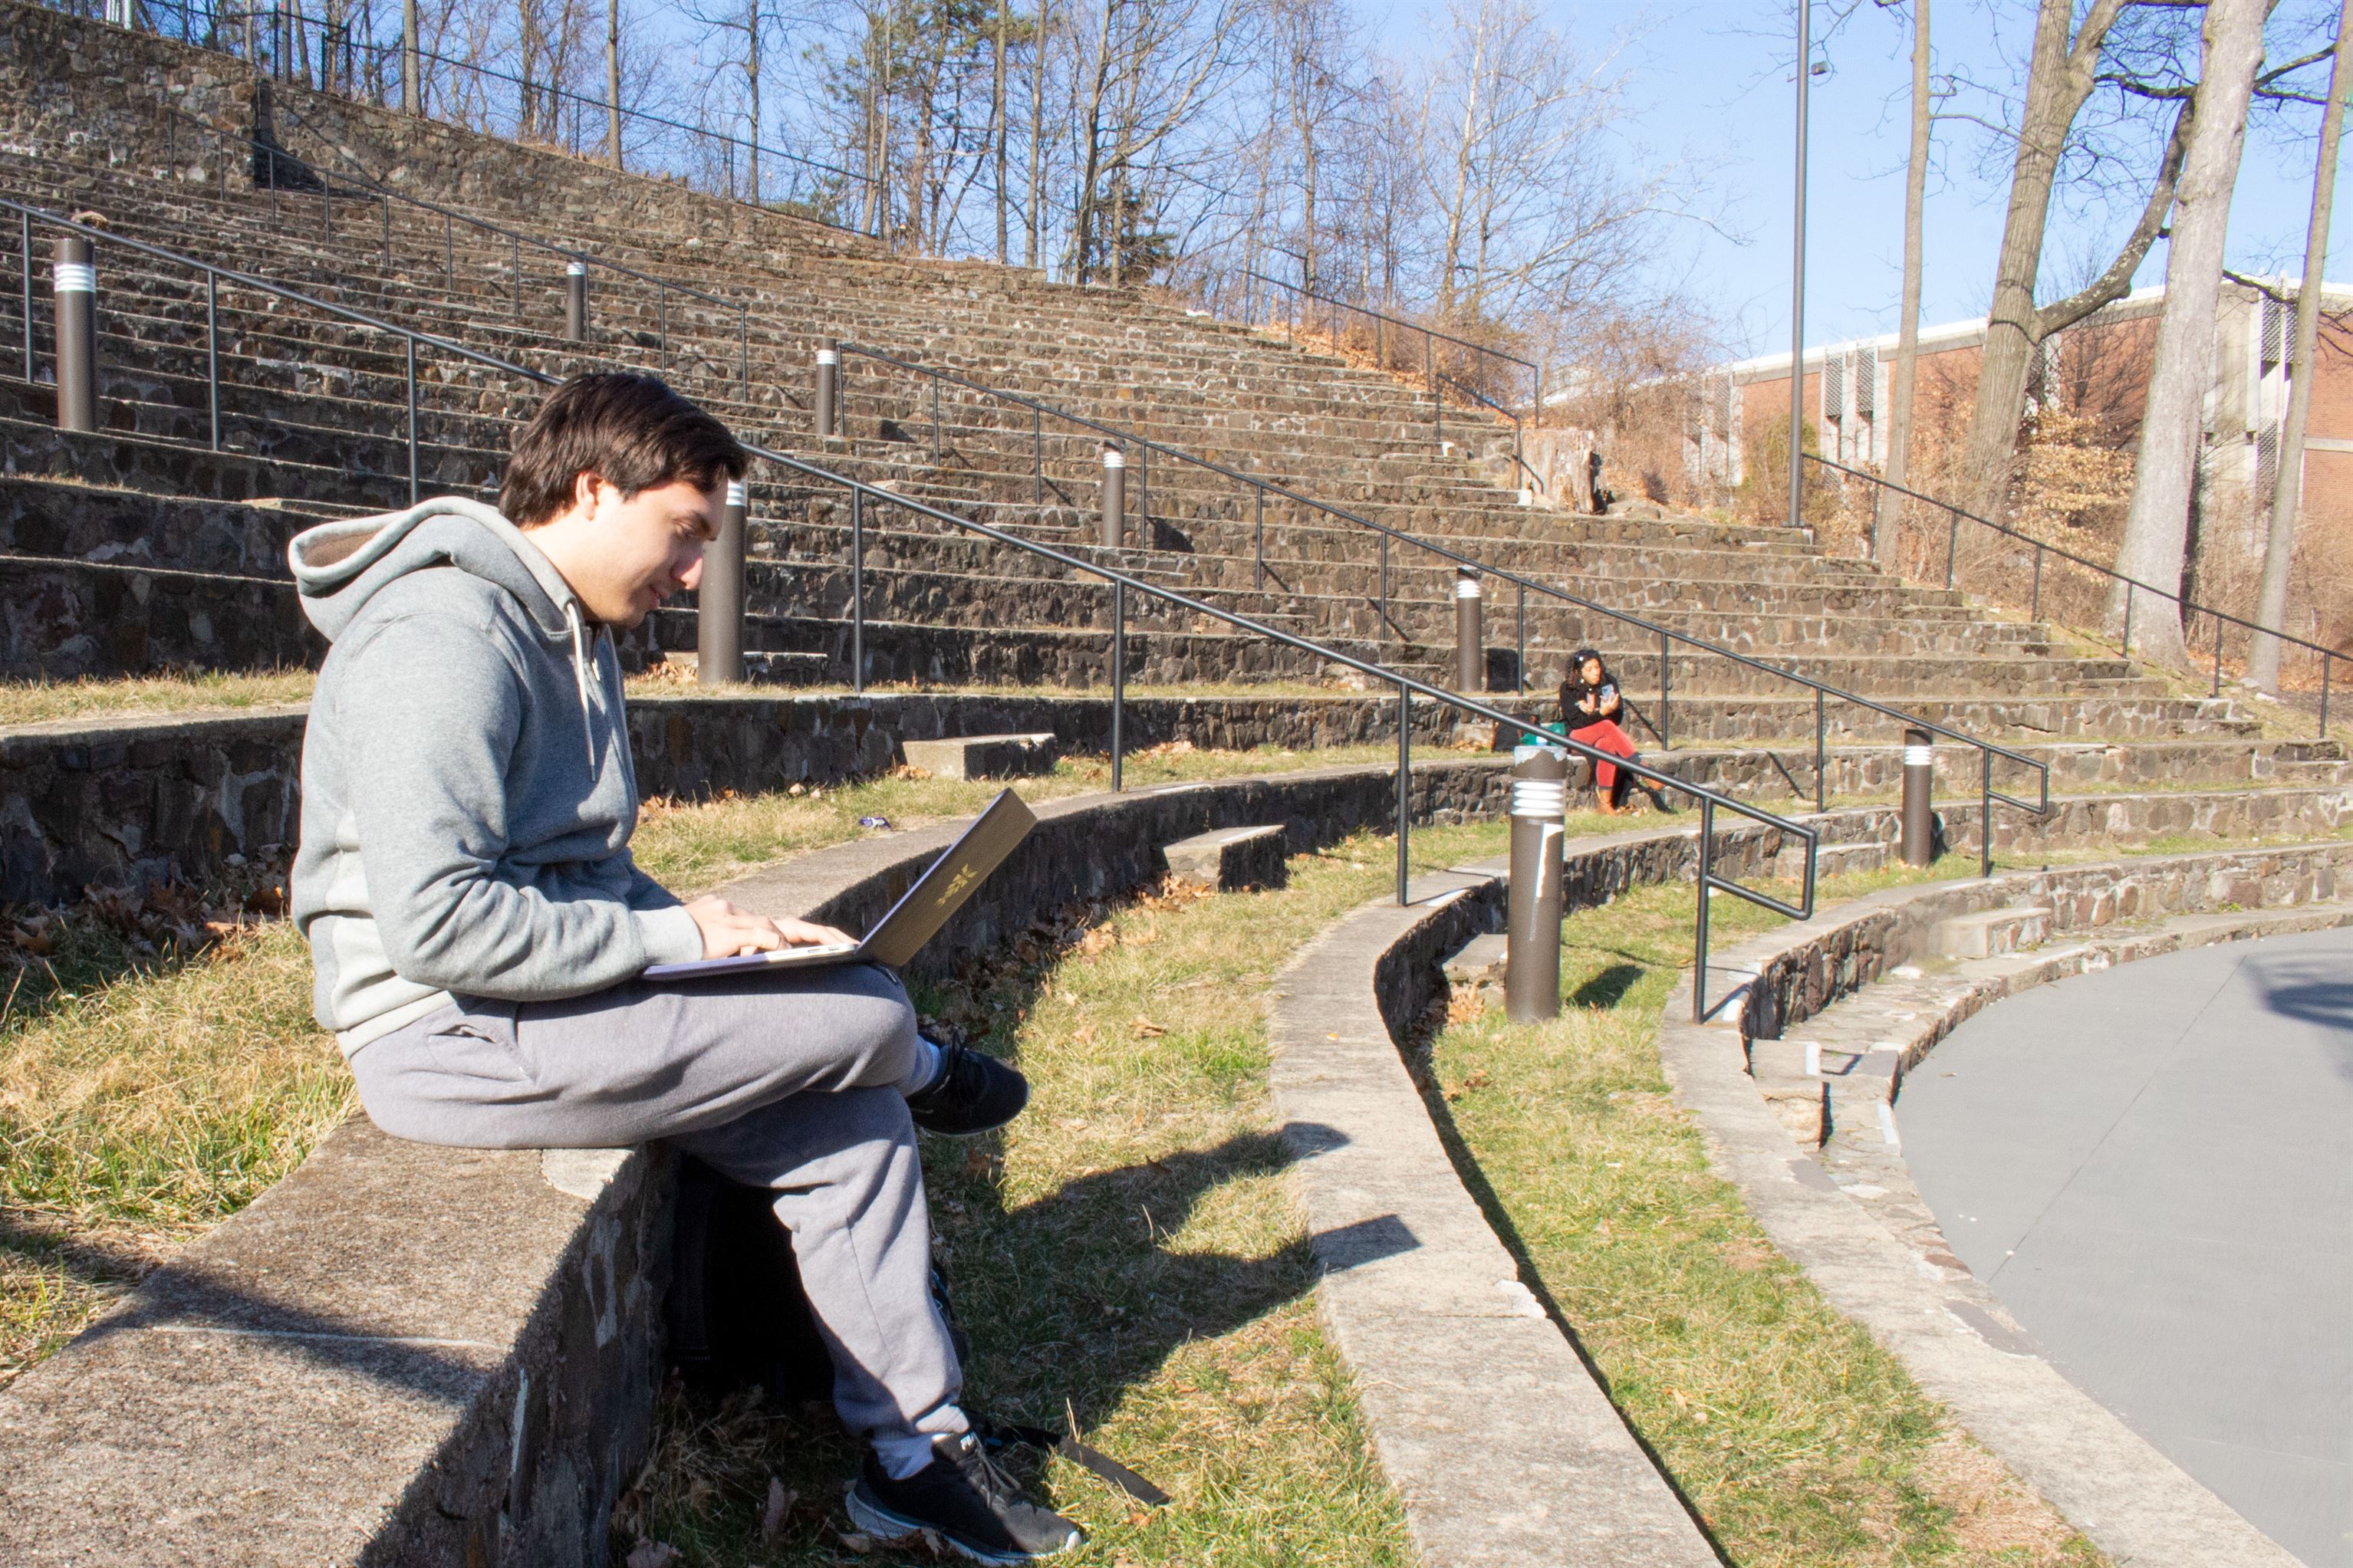 Students can study and relax on the steps of the Amphitheater.
Sal DiMaggio | The Montclarion.